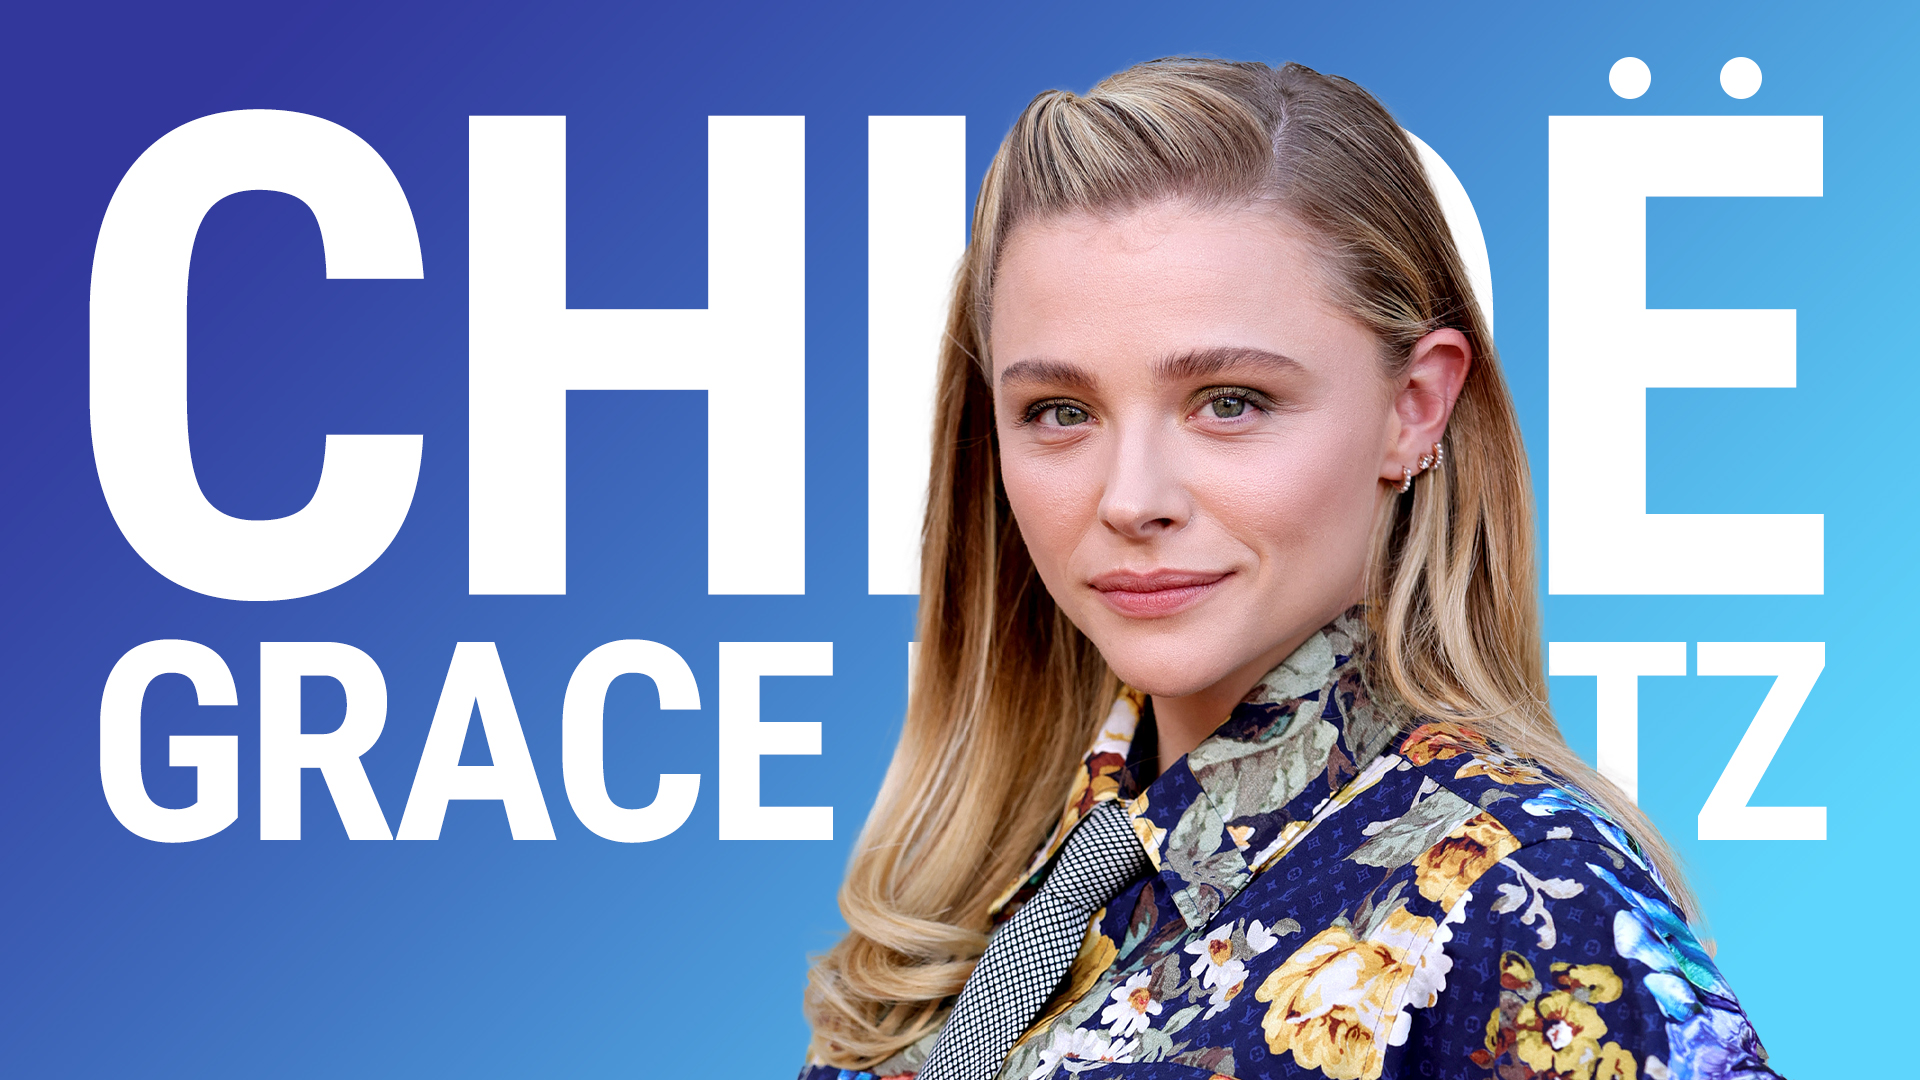 USA Actress Chloe Grace Moretz Images And Facts